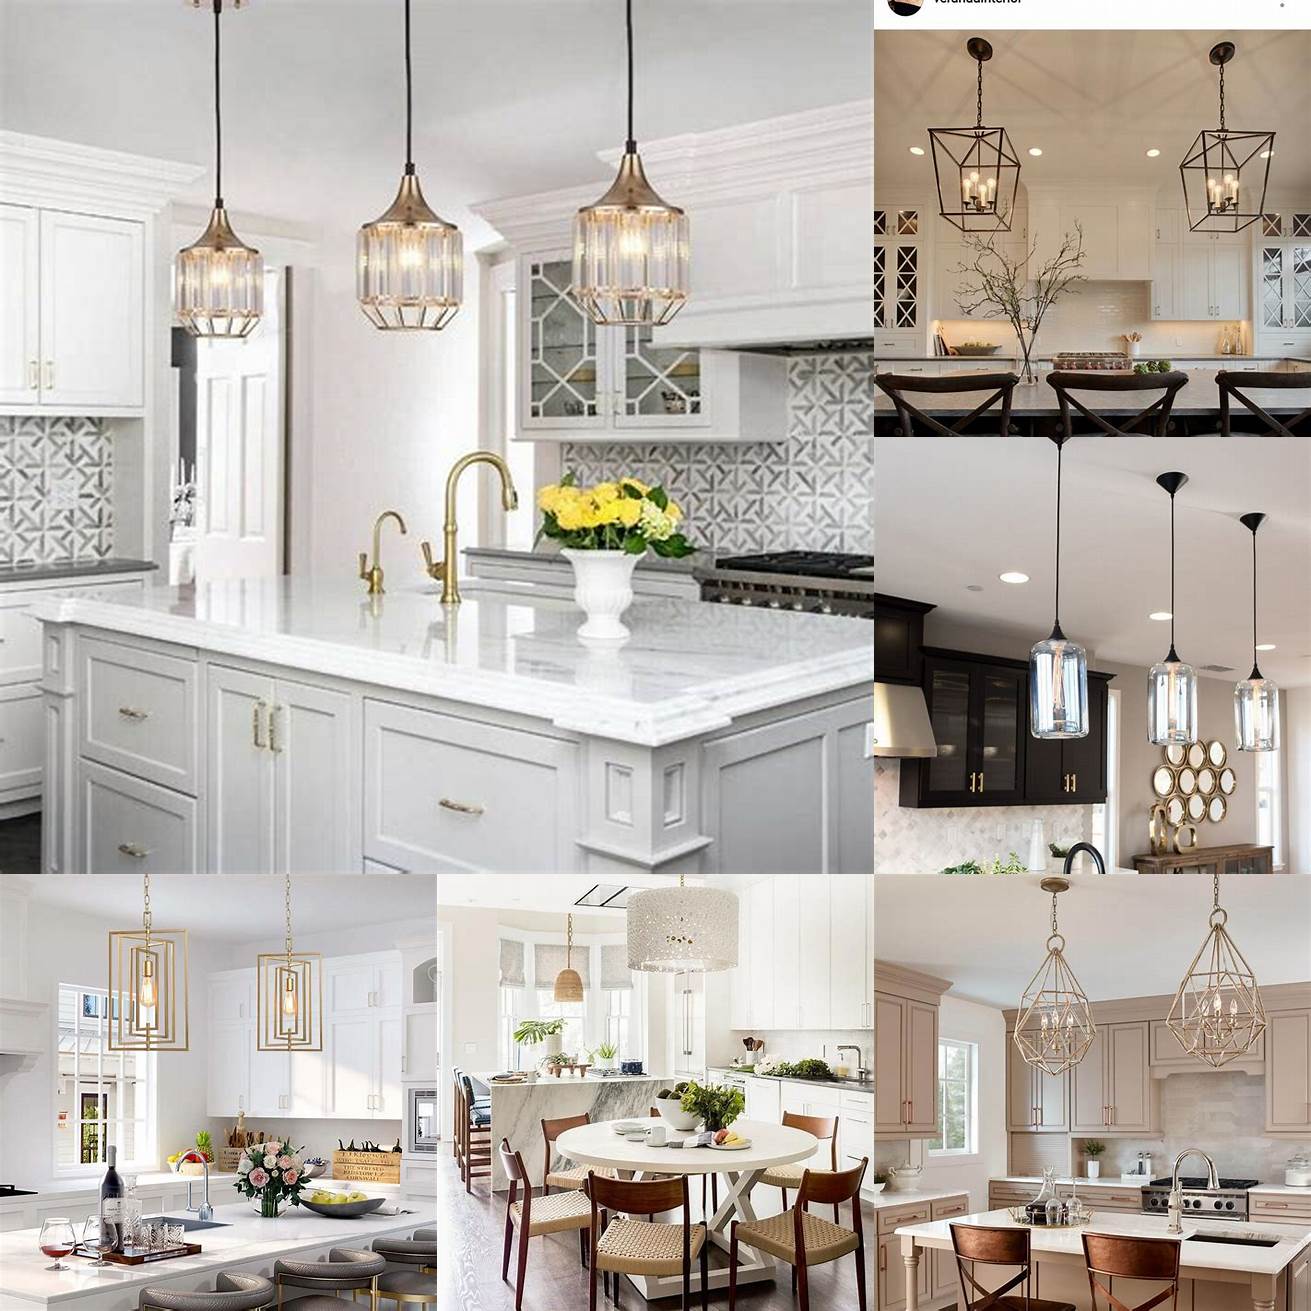 White kitchen table and chairs with pendant lights